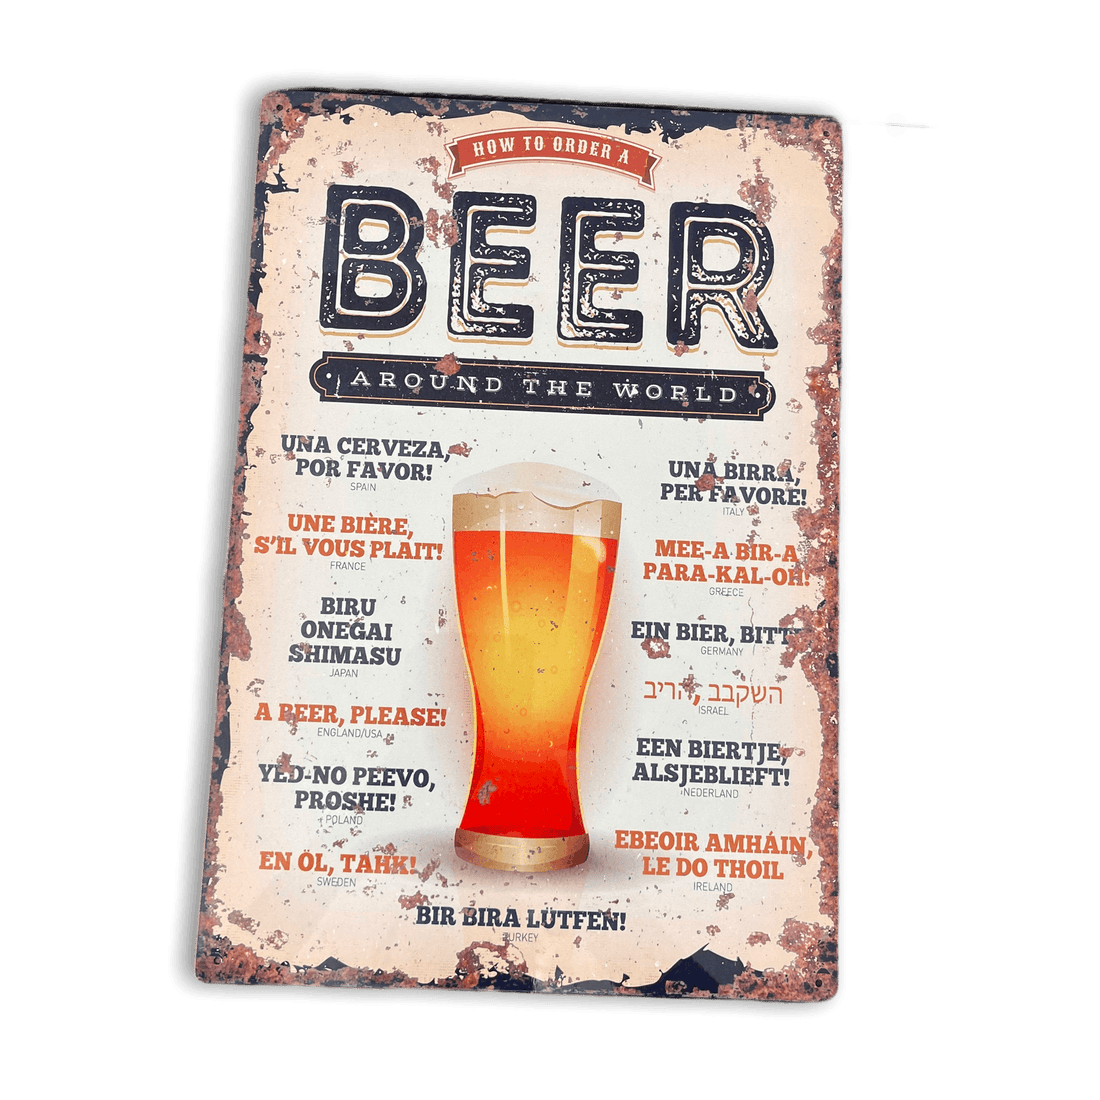 Vintage Metal Sign - How To Order A Beer Around The World - £27.99 - Metal Sign 